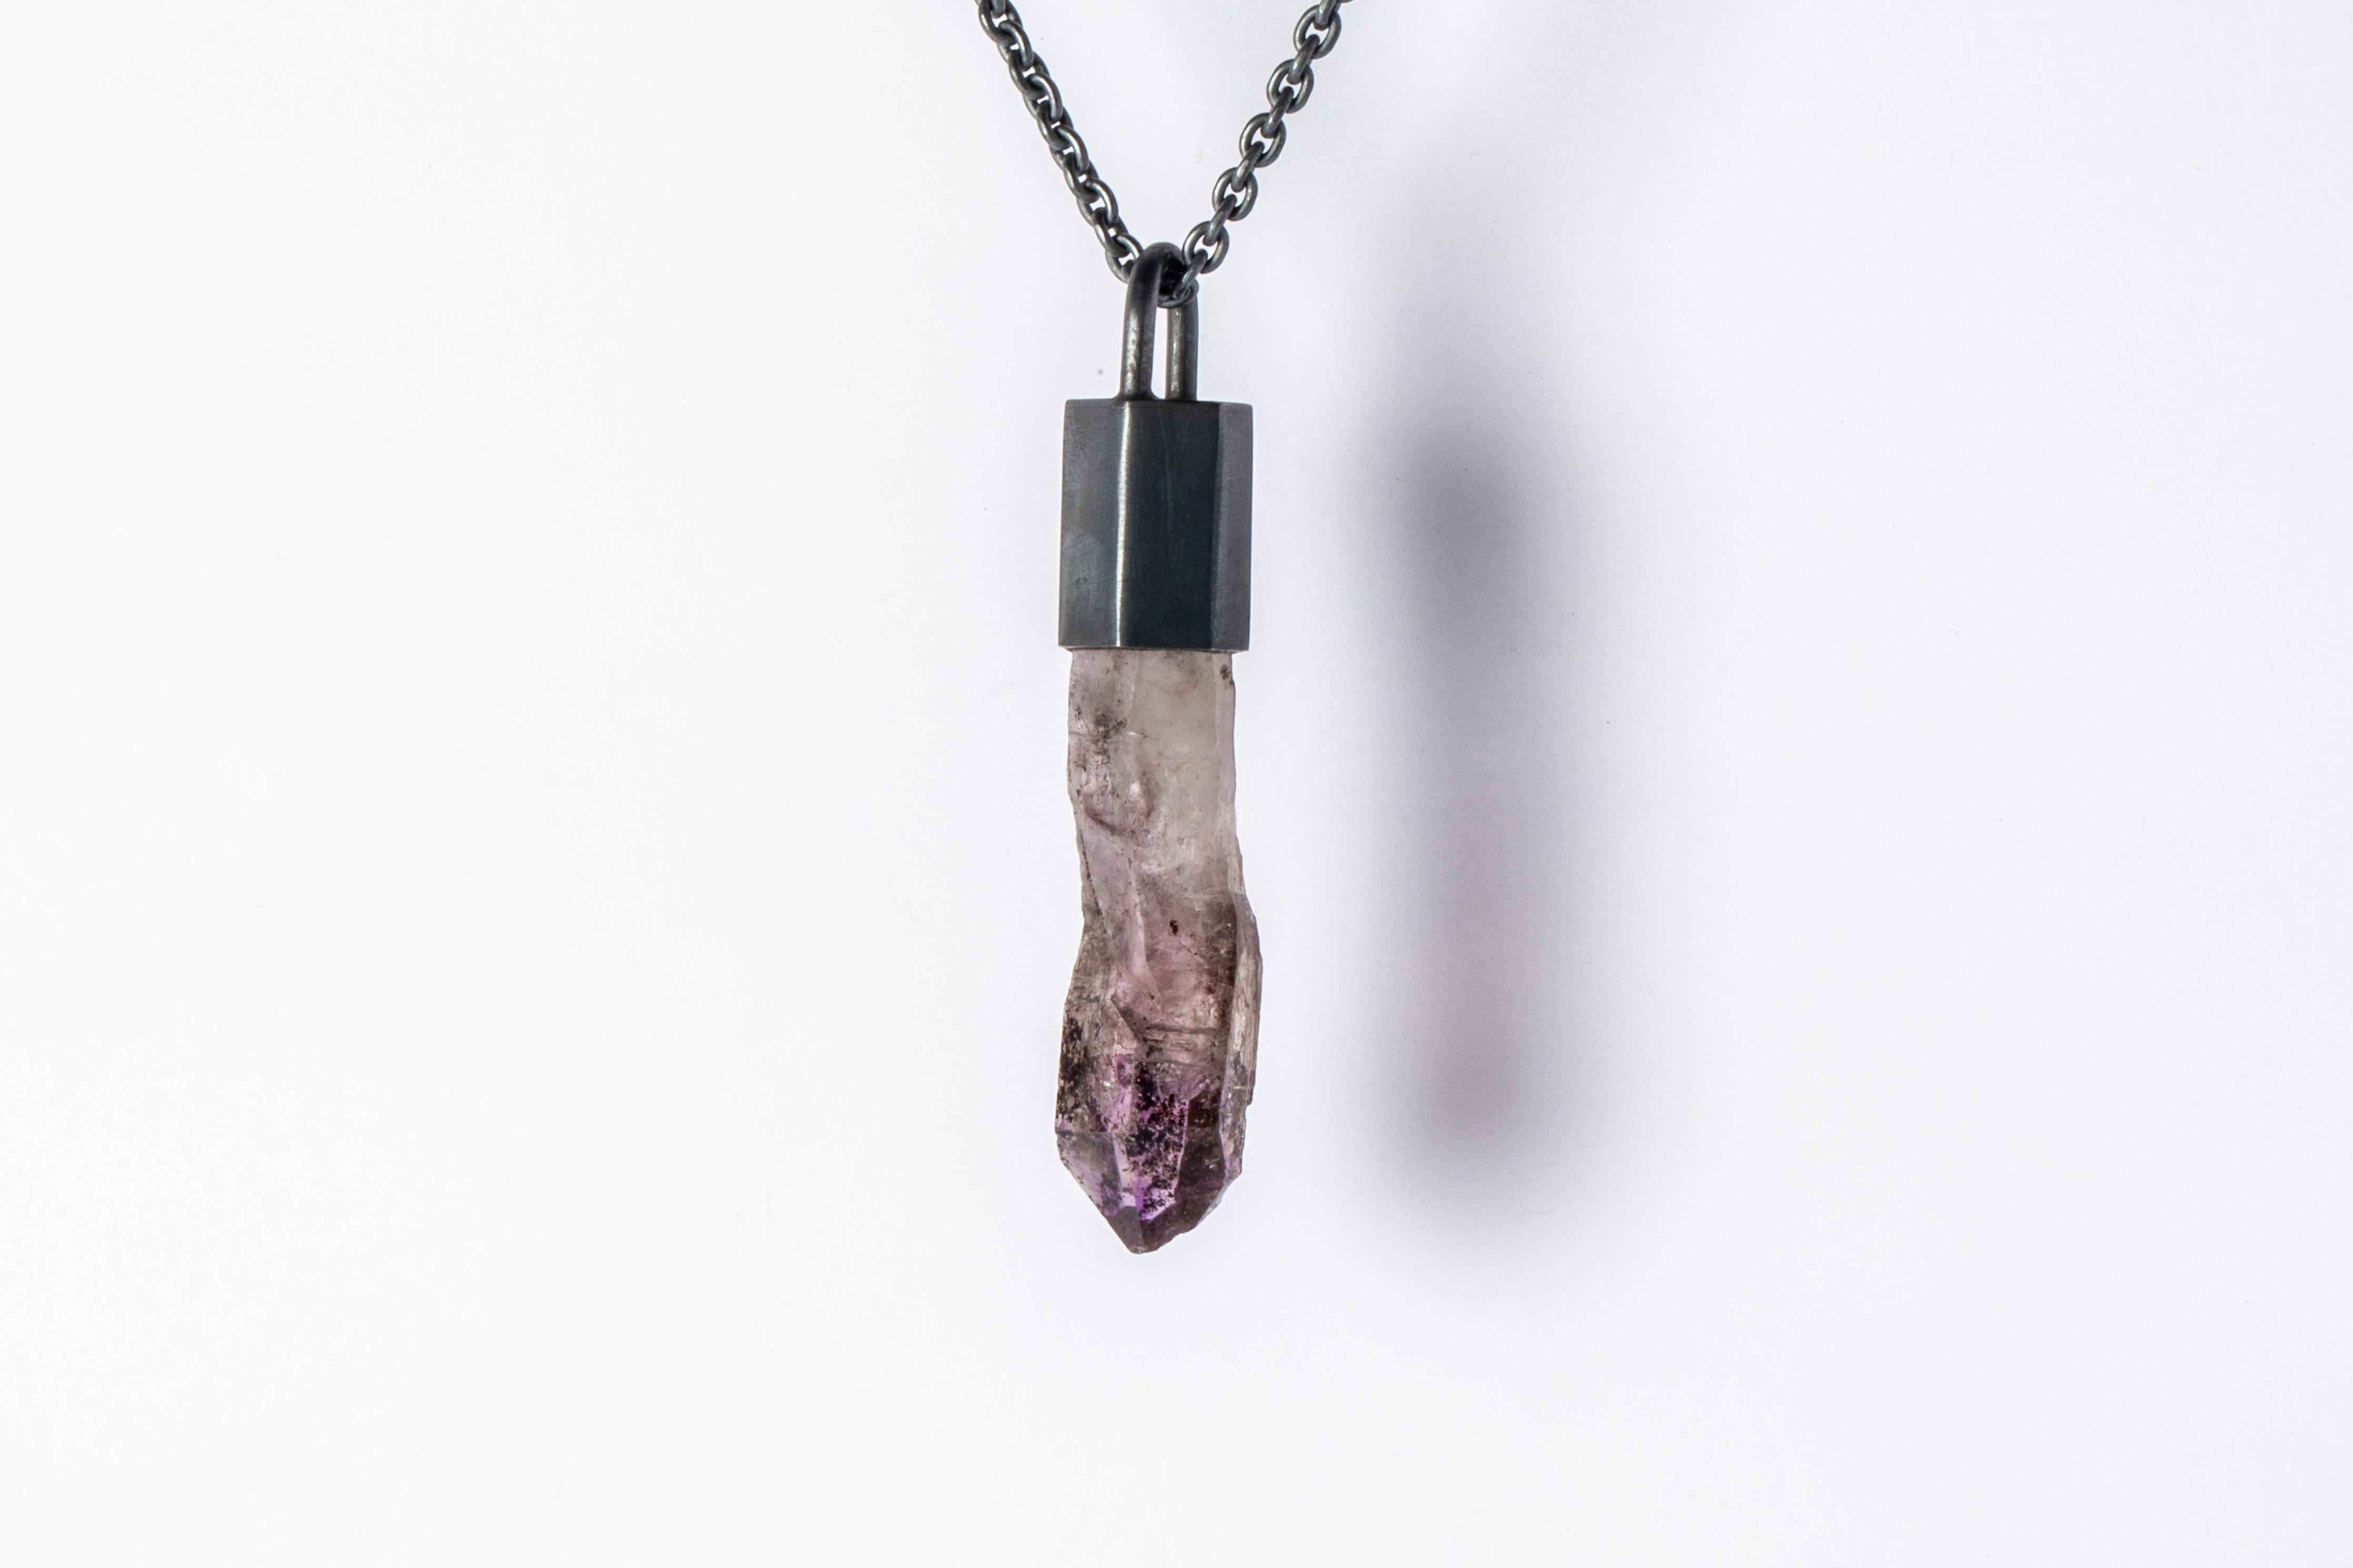 Necklace made in oxidized sterling silver and a rough of brandberg quartz. The Talisman series is an exploration into the power of natural crystals. The crystals used in these pieces are discovered through adventure and are hand selected. Each